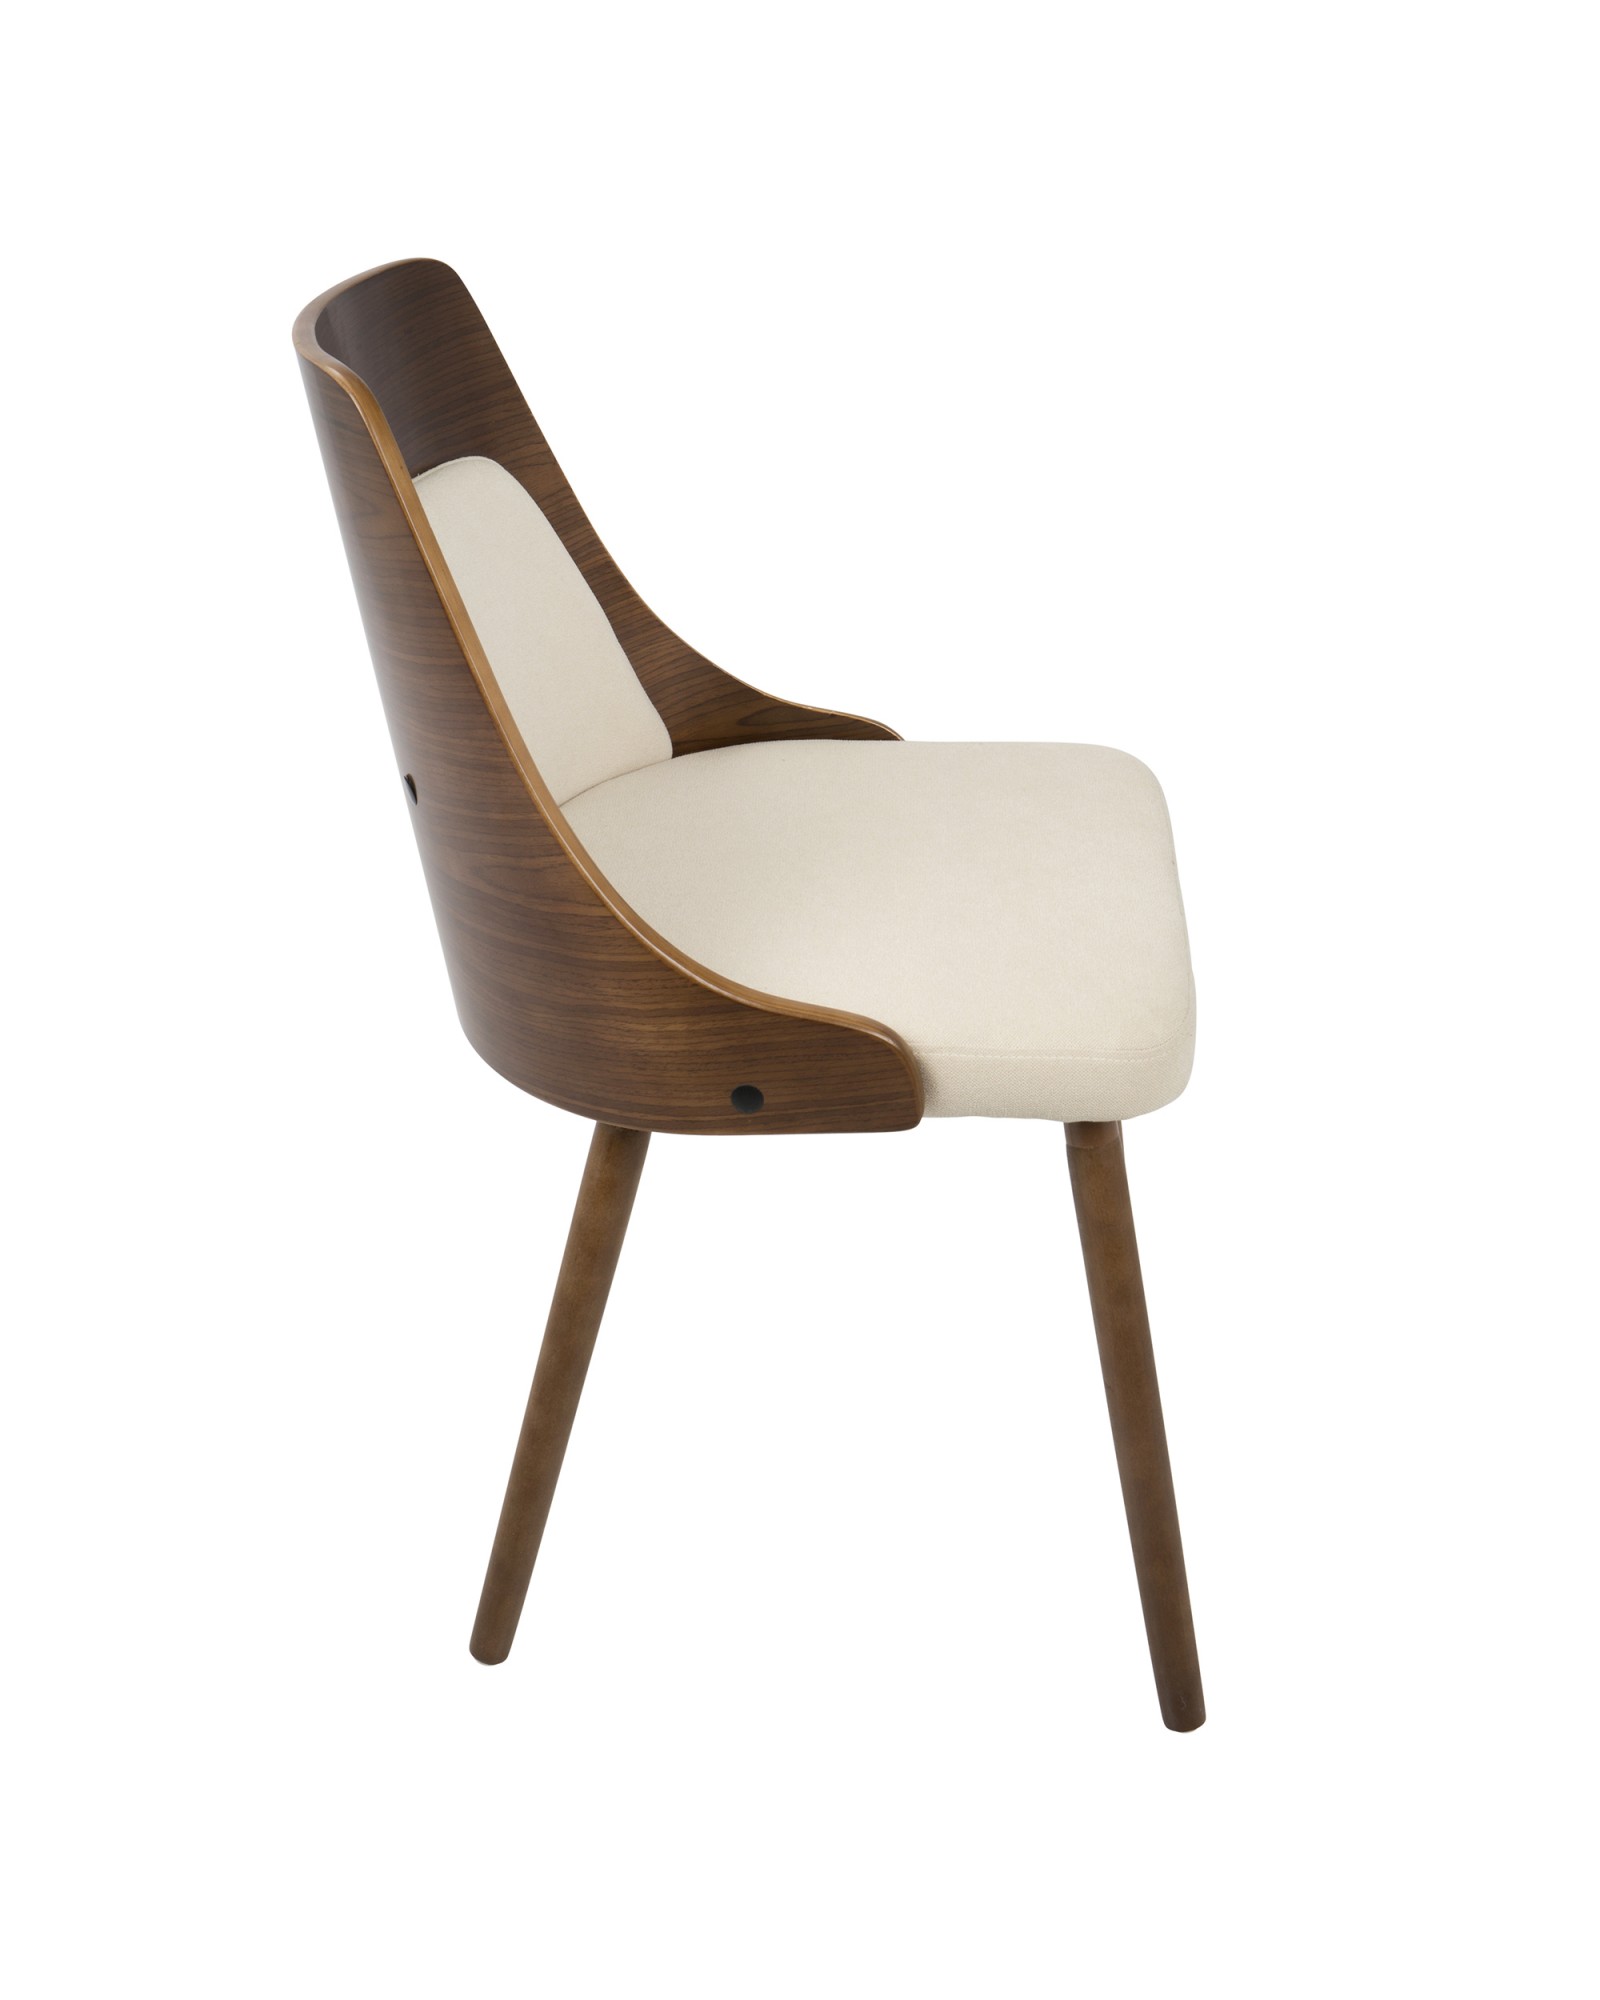 Anabelle Mid-Century Modern Dining/Accent Chair in Walnut and Cream Fabric